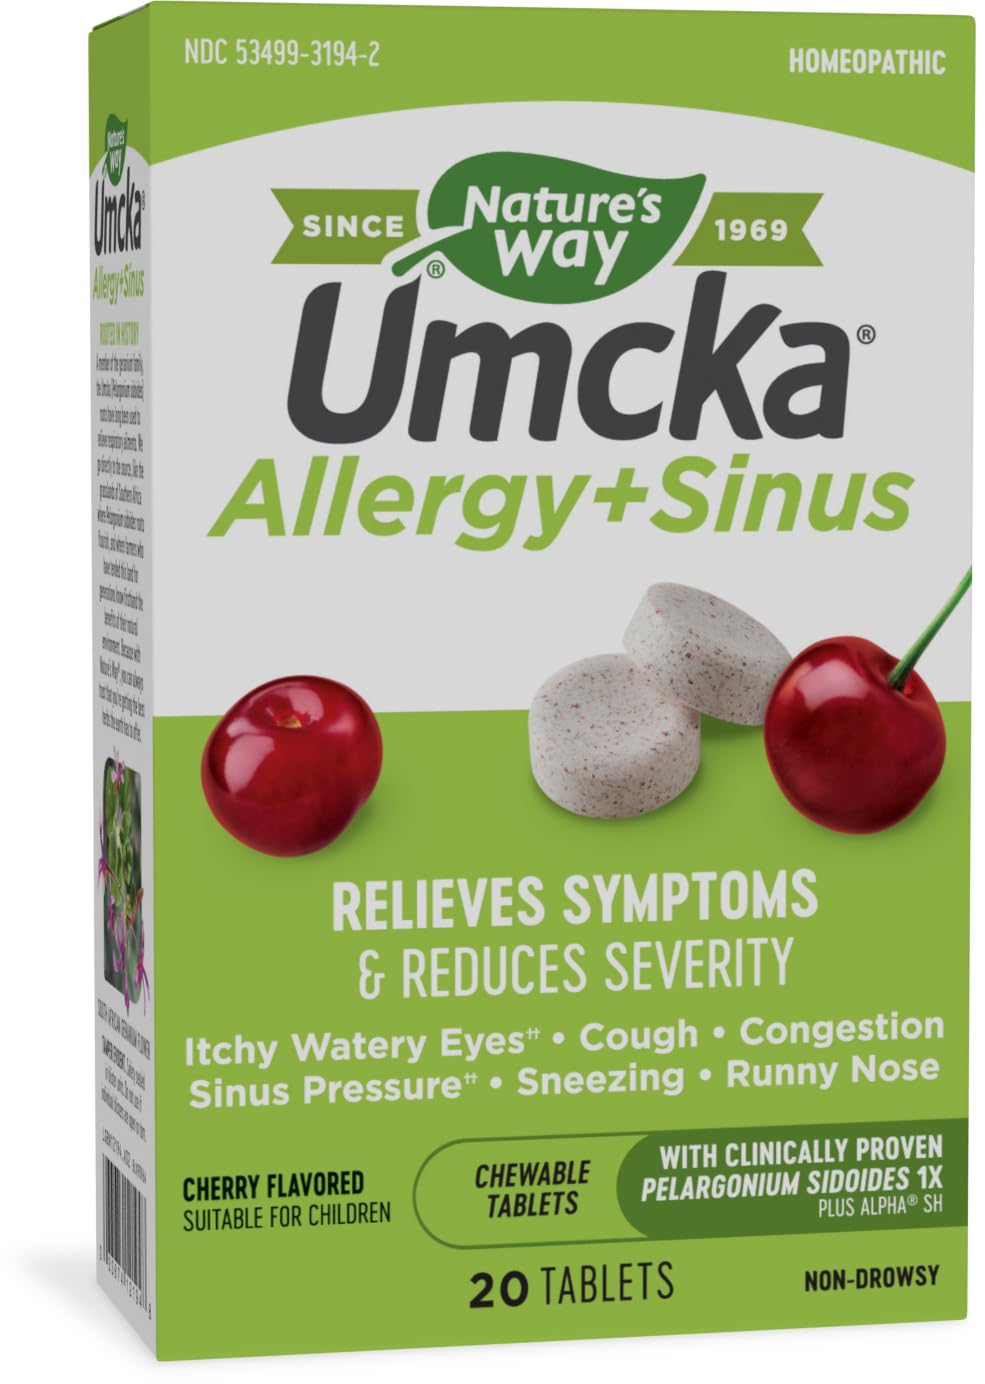 Nature's Way Umcka ColdCare Homeopathic, Shortens Colds & Umcka Allergy+Sinus Homeopathic, Sneezing, Runny Nose